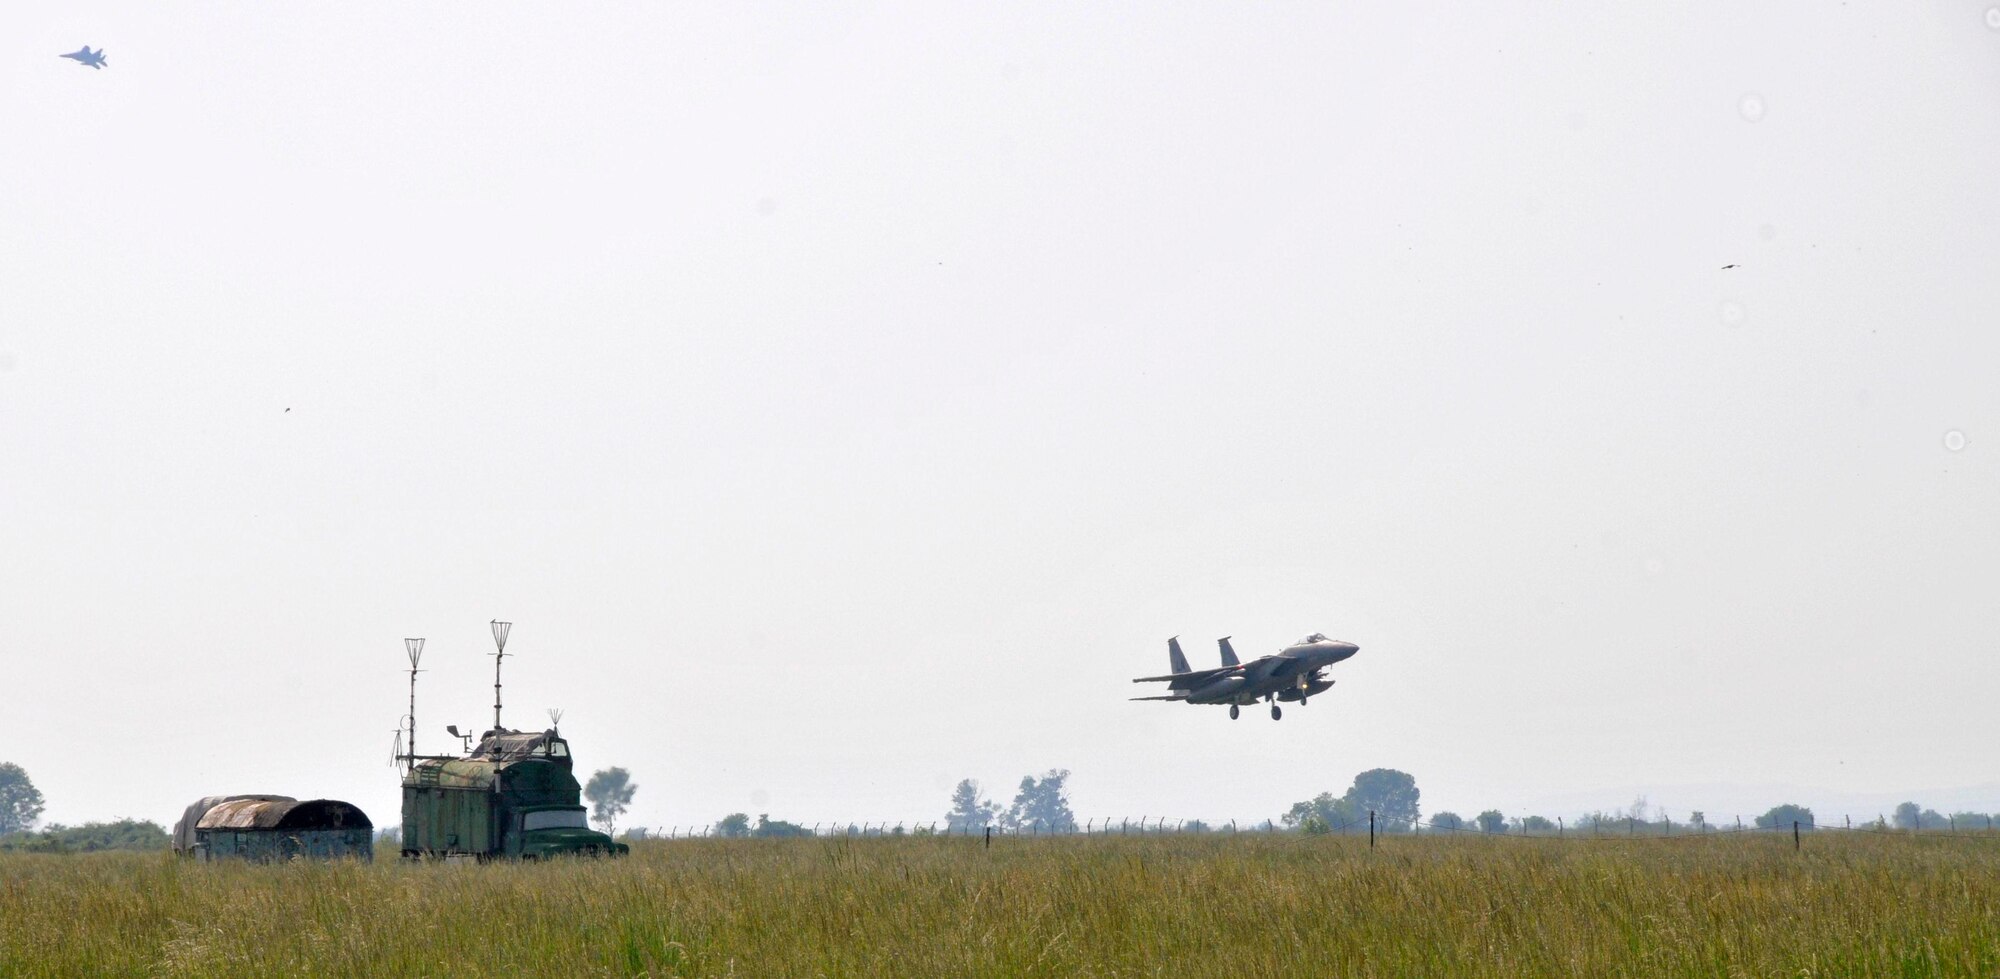 GRAF IGNATIEVO AIR FORCE BASE, Bulgaria - An F-15 from the 493rd Fighter Squadron at RAF Lakenheath, England, lands at Graf Ignatievo Air Force Base in Plovdiv, Bulgaria, May 13, Airmen from the 48th Fighter Wing are in Bulgaria taking part in Sentry Gold, an exercise developed to familiarize U.S. pilots with the MiG airframes, build partnerships with the Bulgarian air force and assist them in their continued integration into NATO operations.